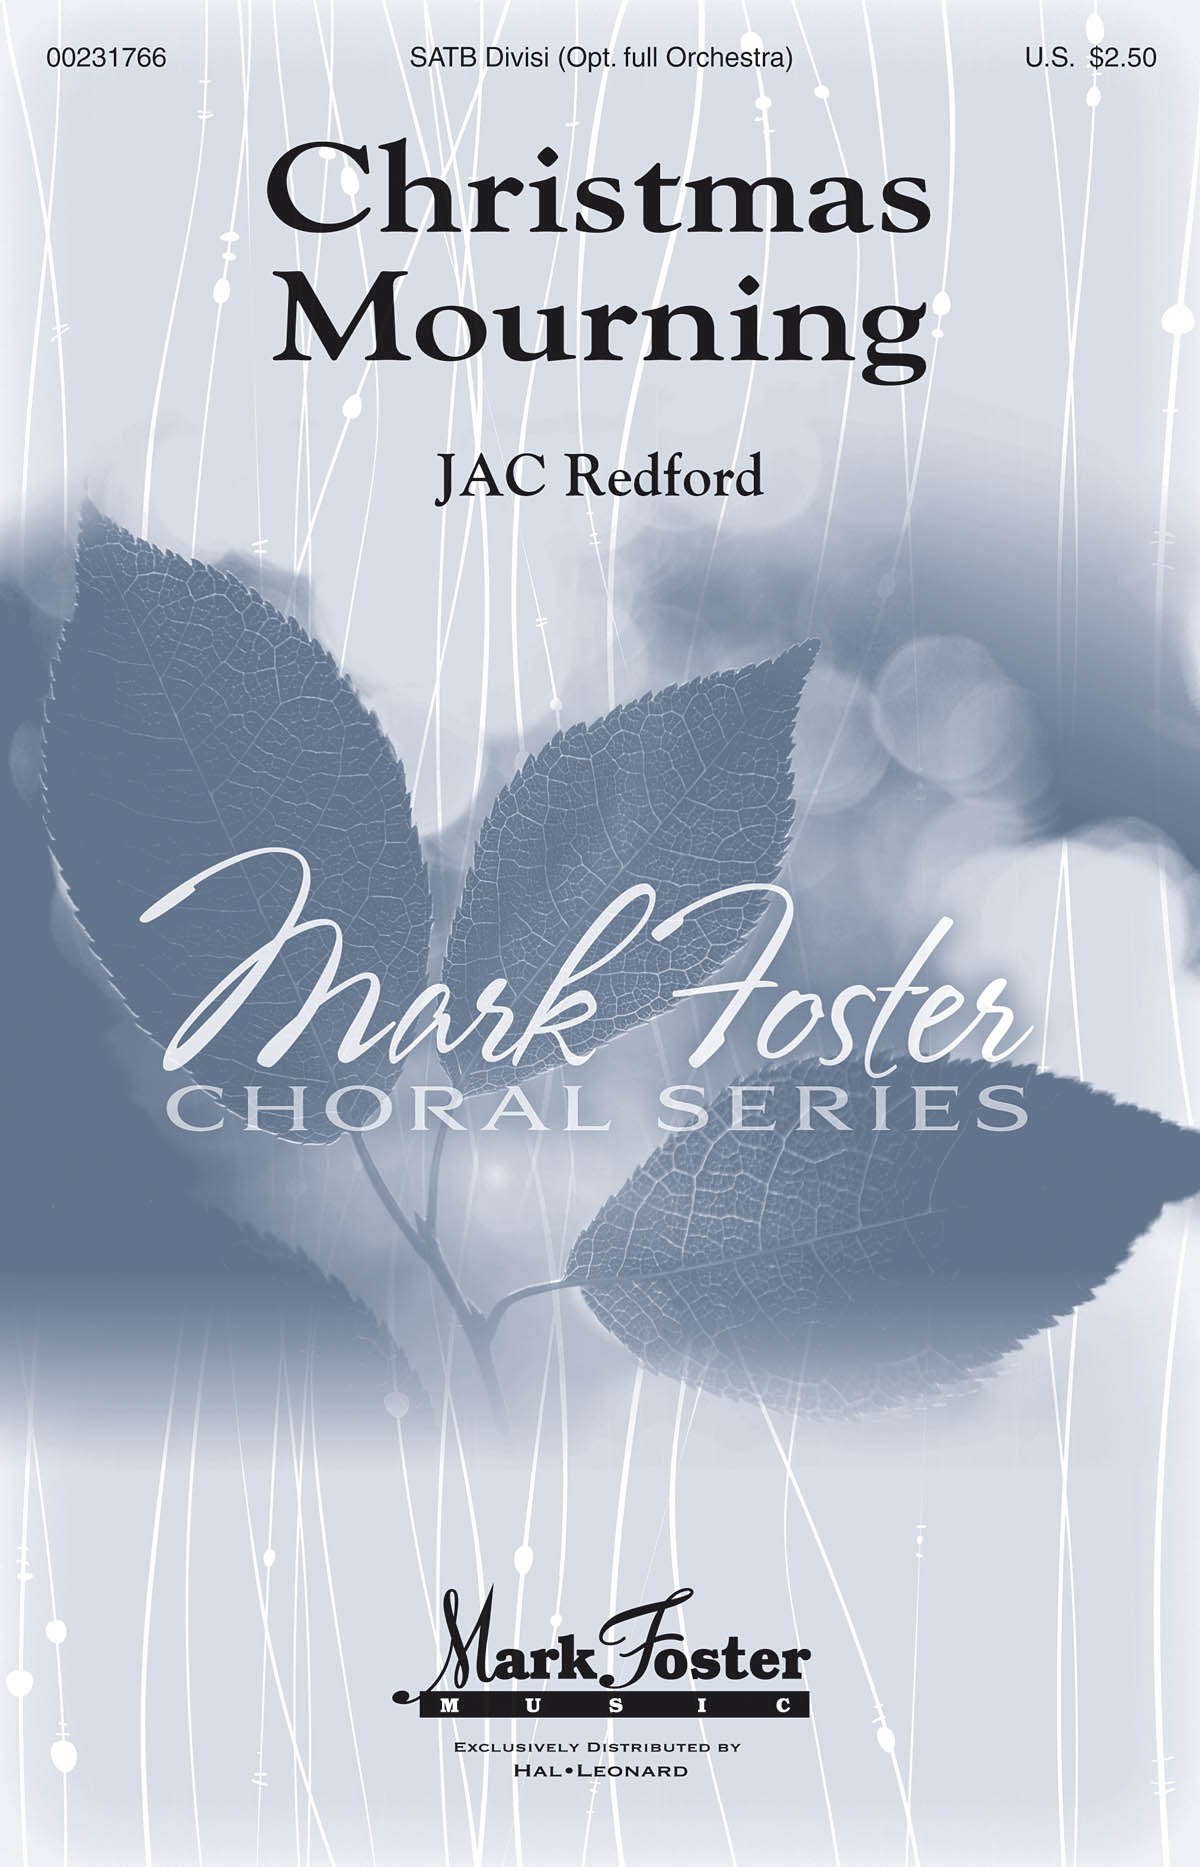 J.A.C. Redford: Christmas Mourning: Mixed Choir a Cappella: Vocal Score